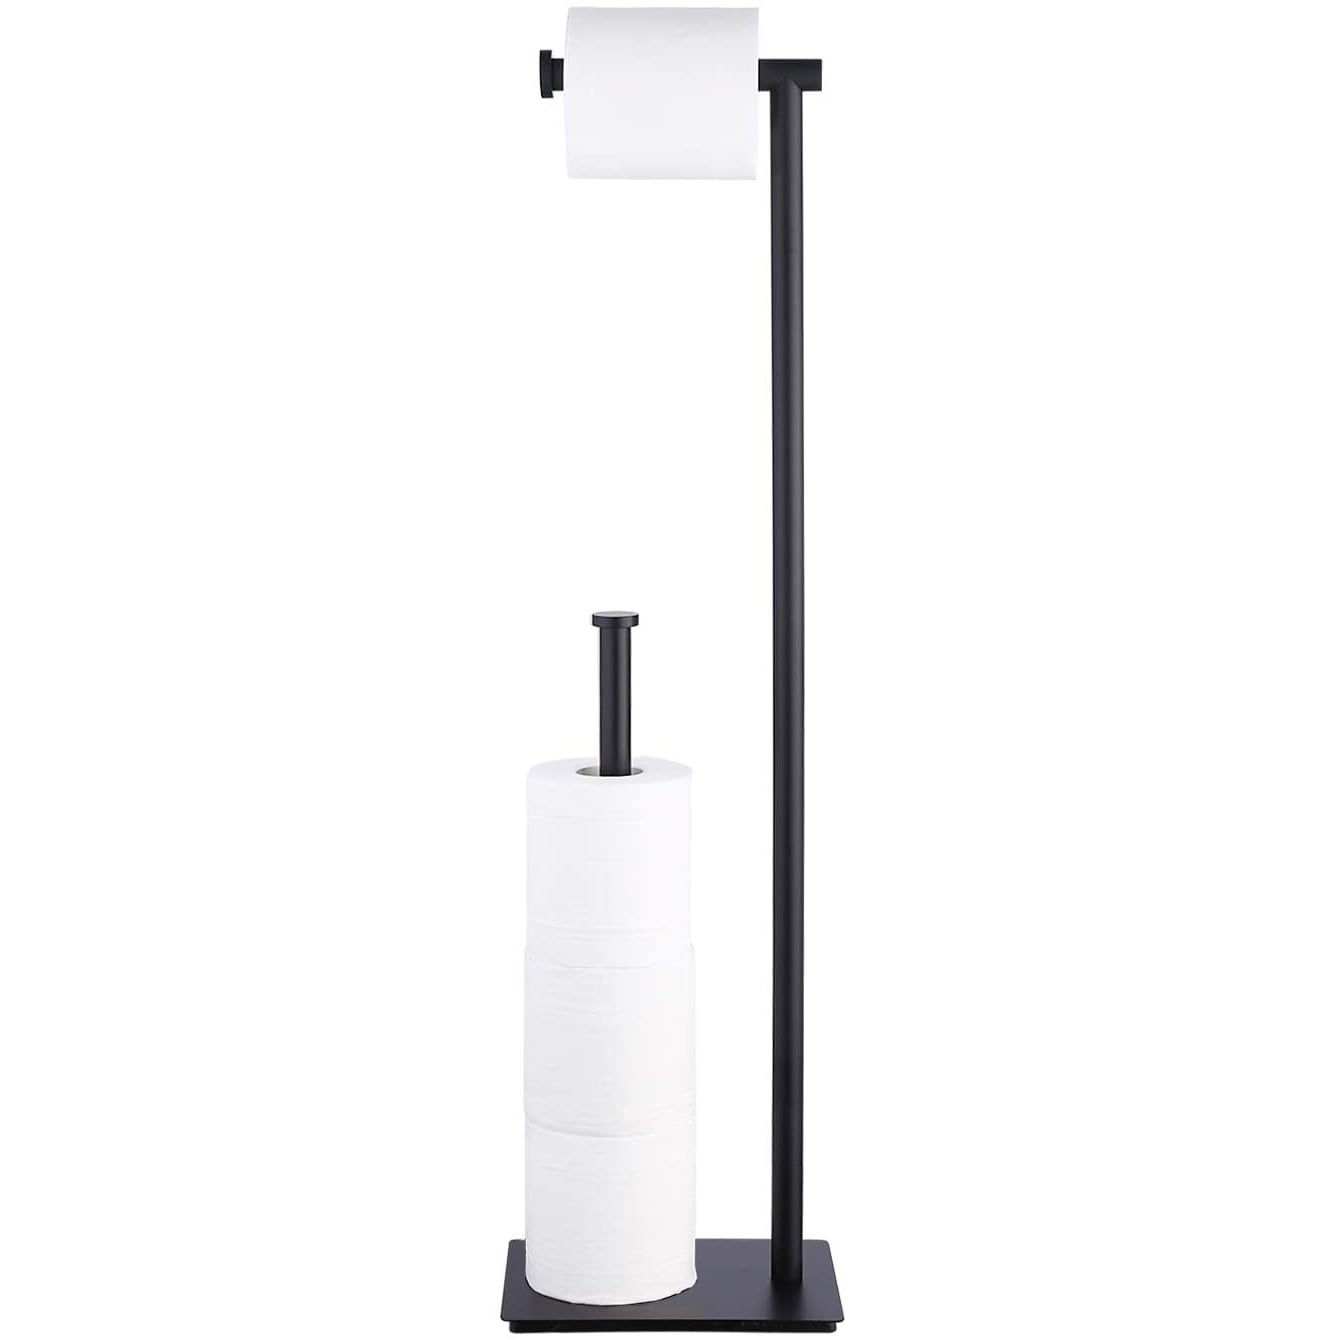 https://ak1.ostkcdn.com/images/products/is/images/direct/c215a5533d23bff13fa1abf75f2dbe96a690a772/29%22-Height-Freestanding-Toilet-Paper-Holder-with-Reserve.jpg